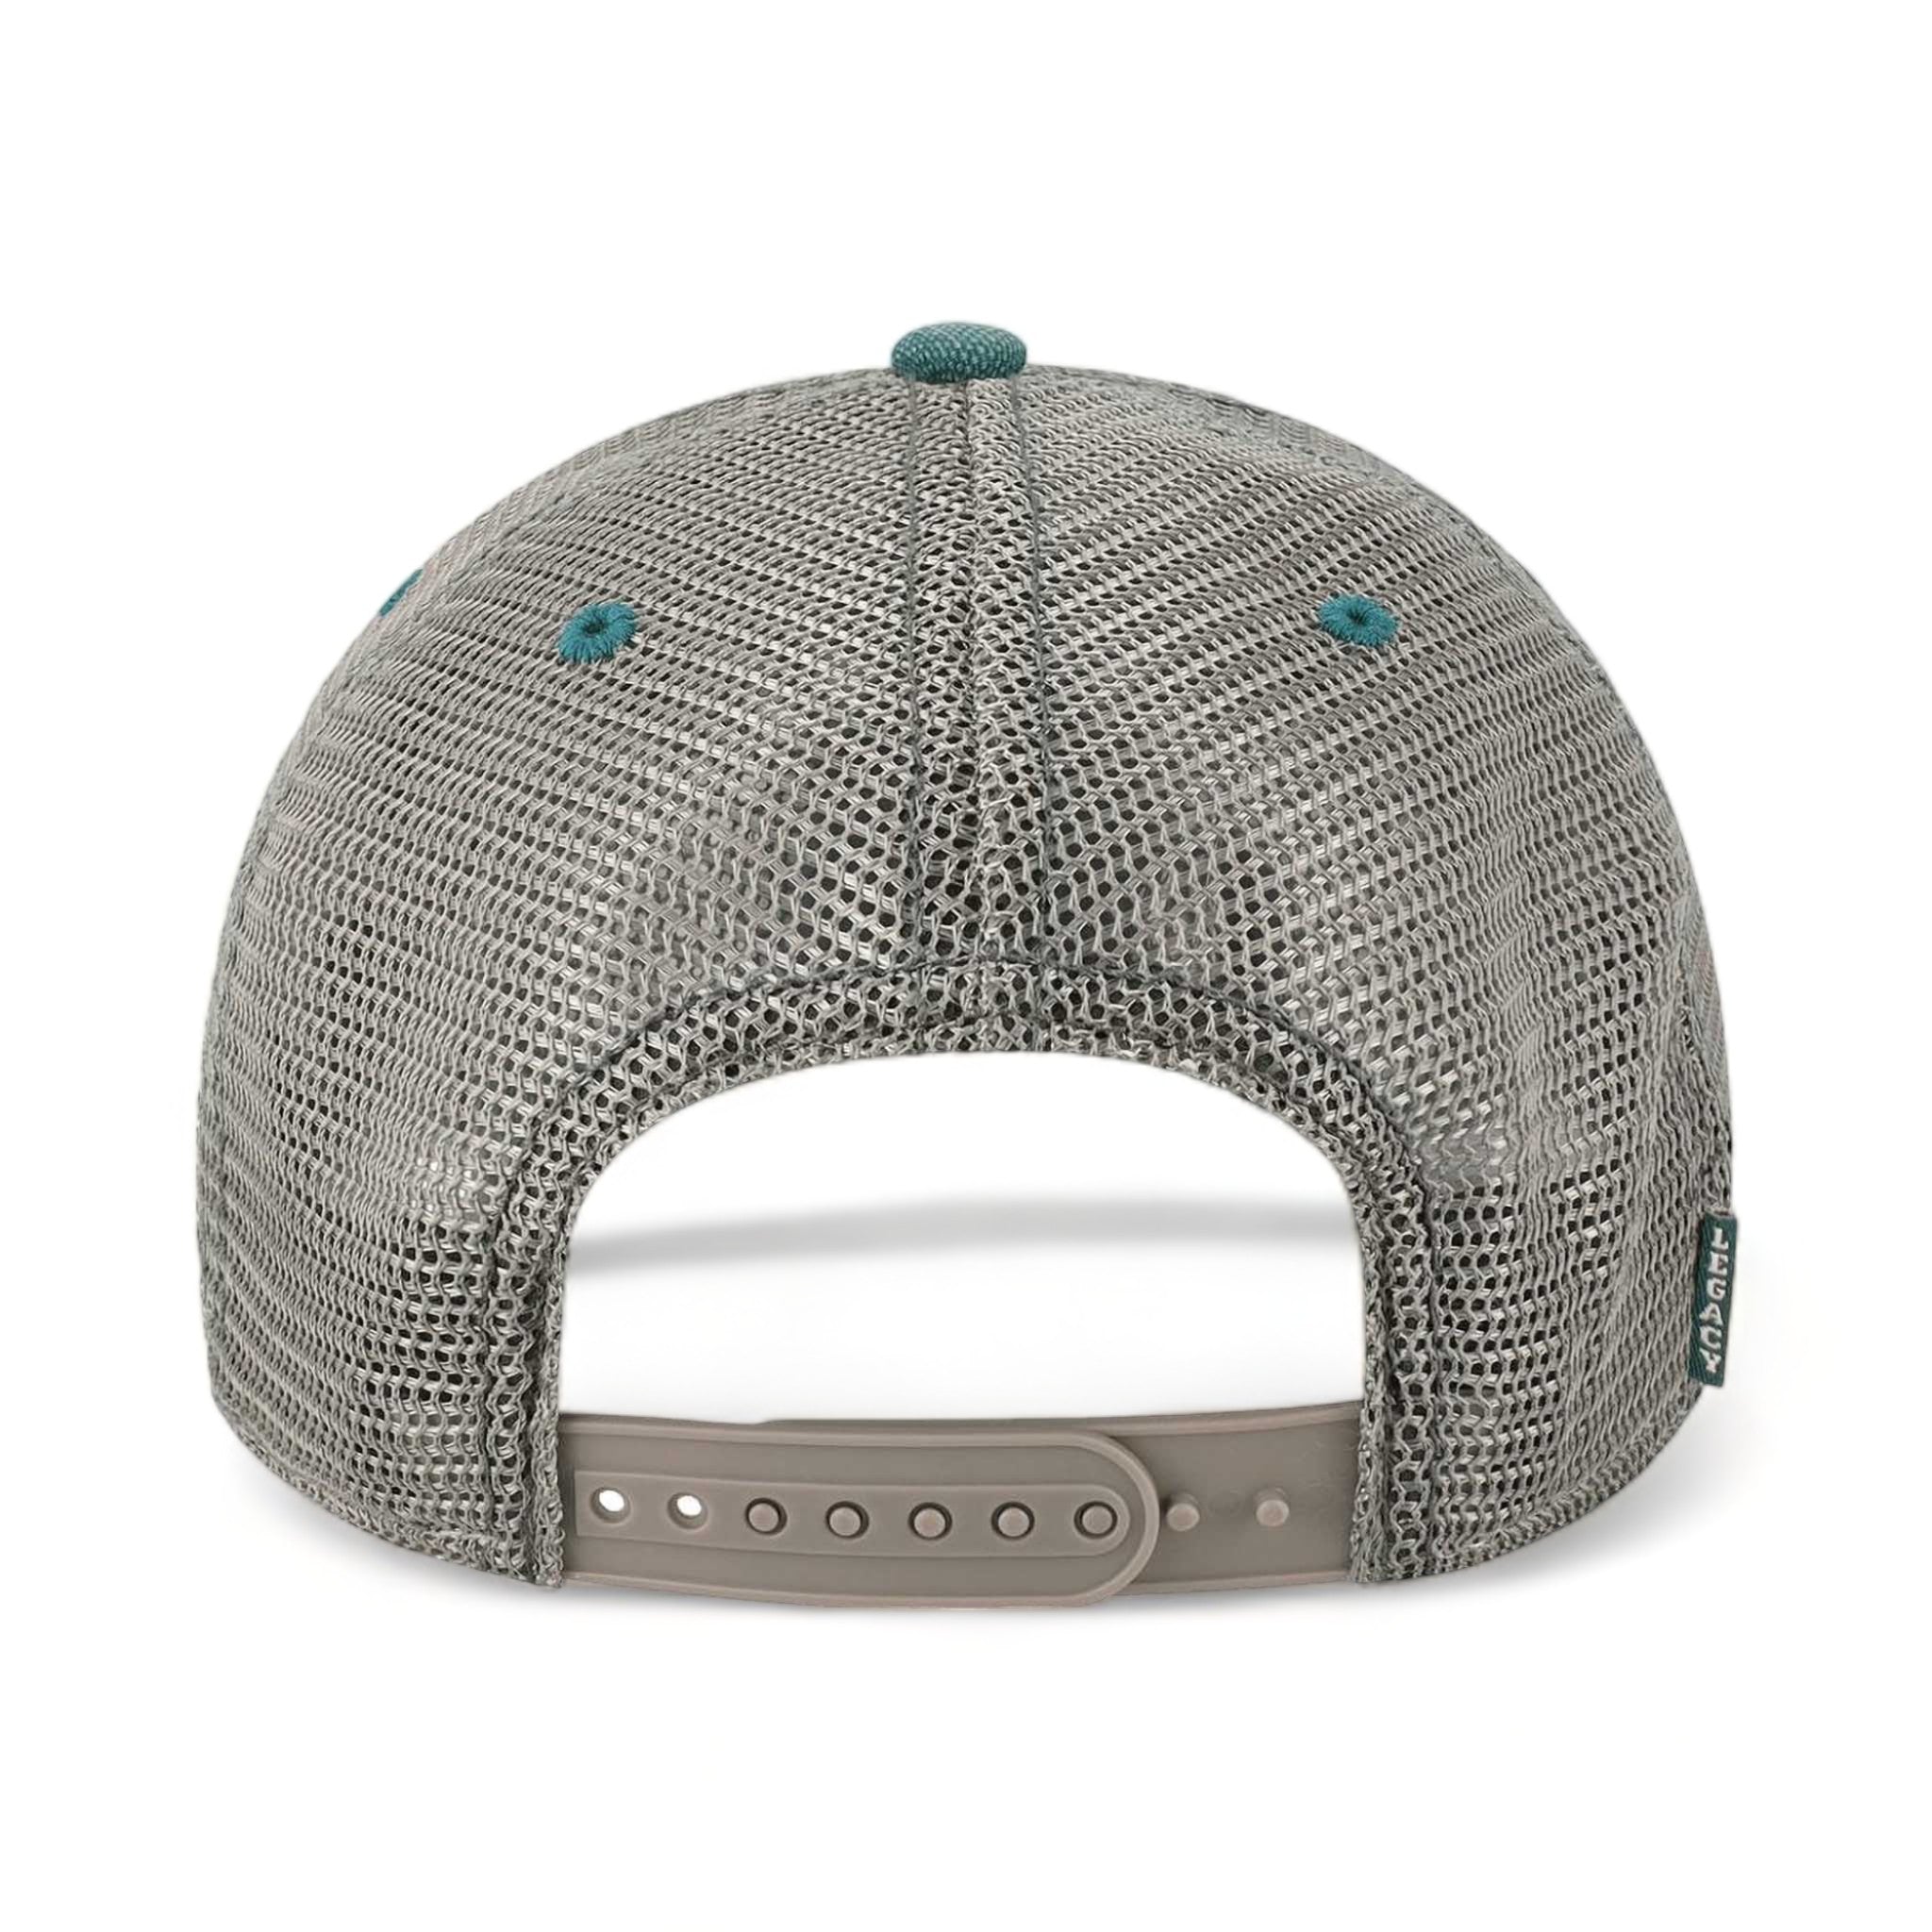 Back view of LEGACY DTA custom hat in marine, navy and grey